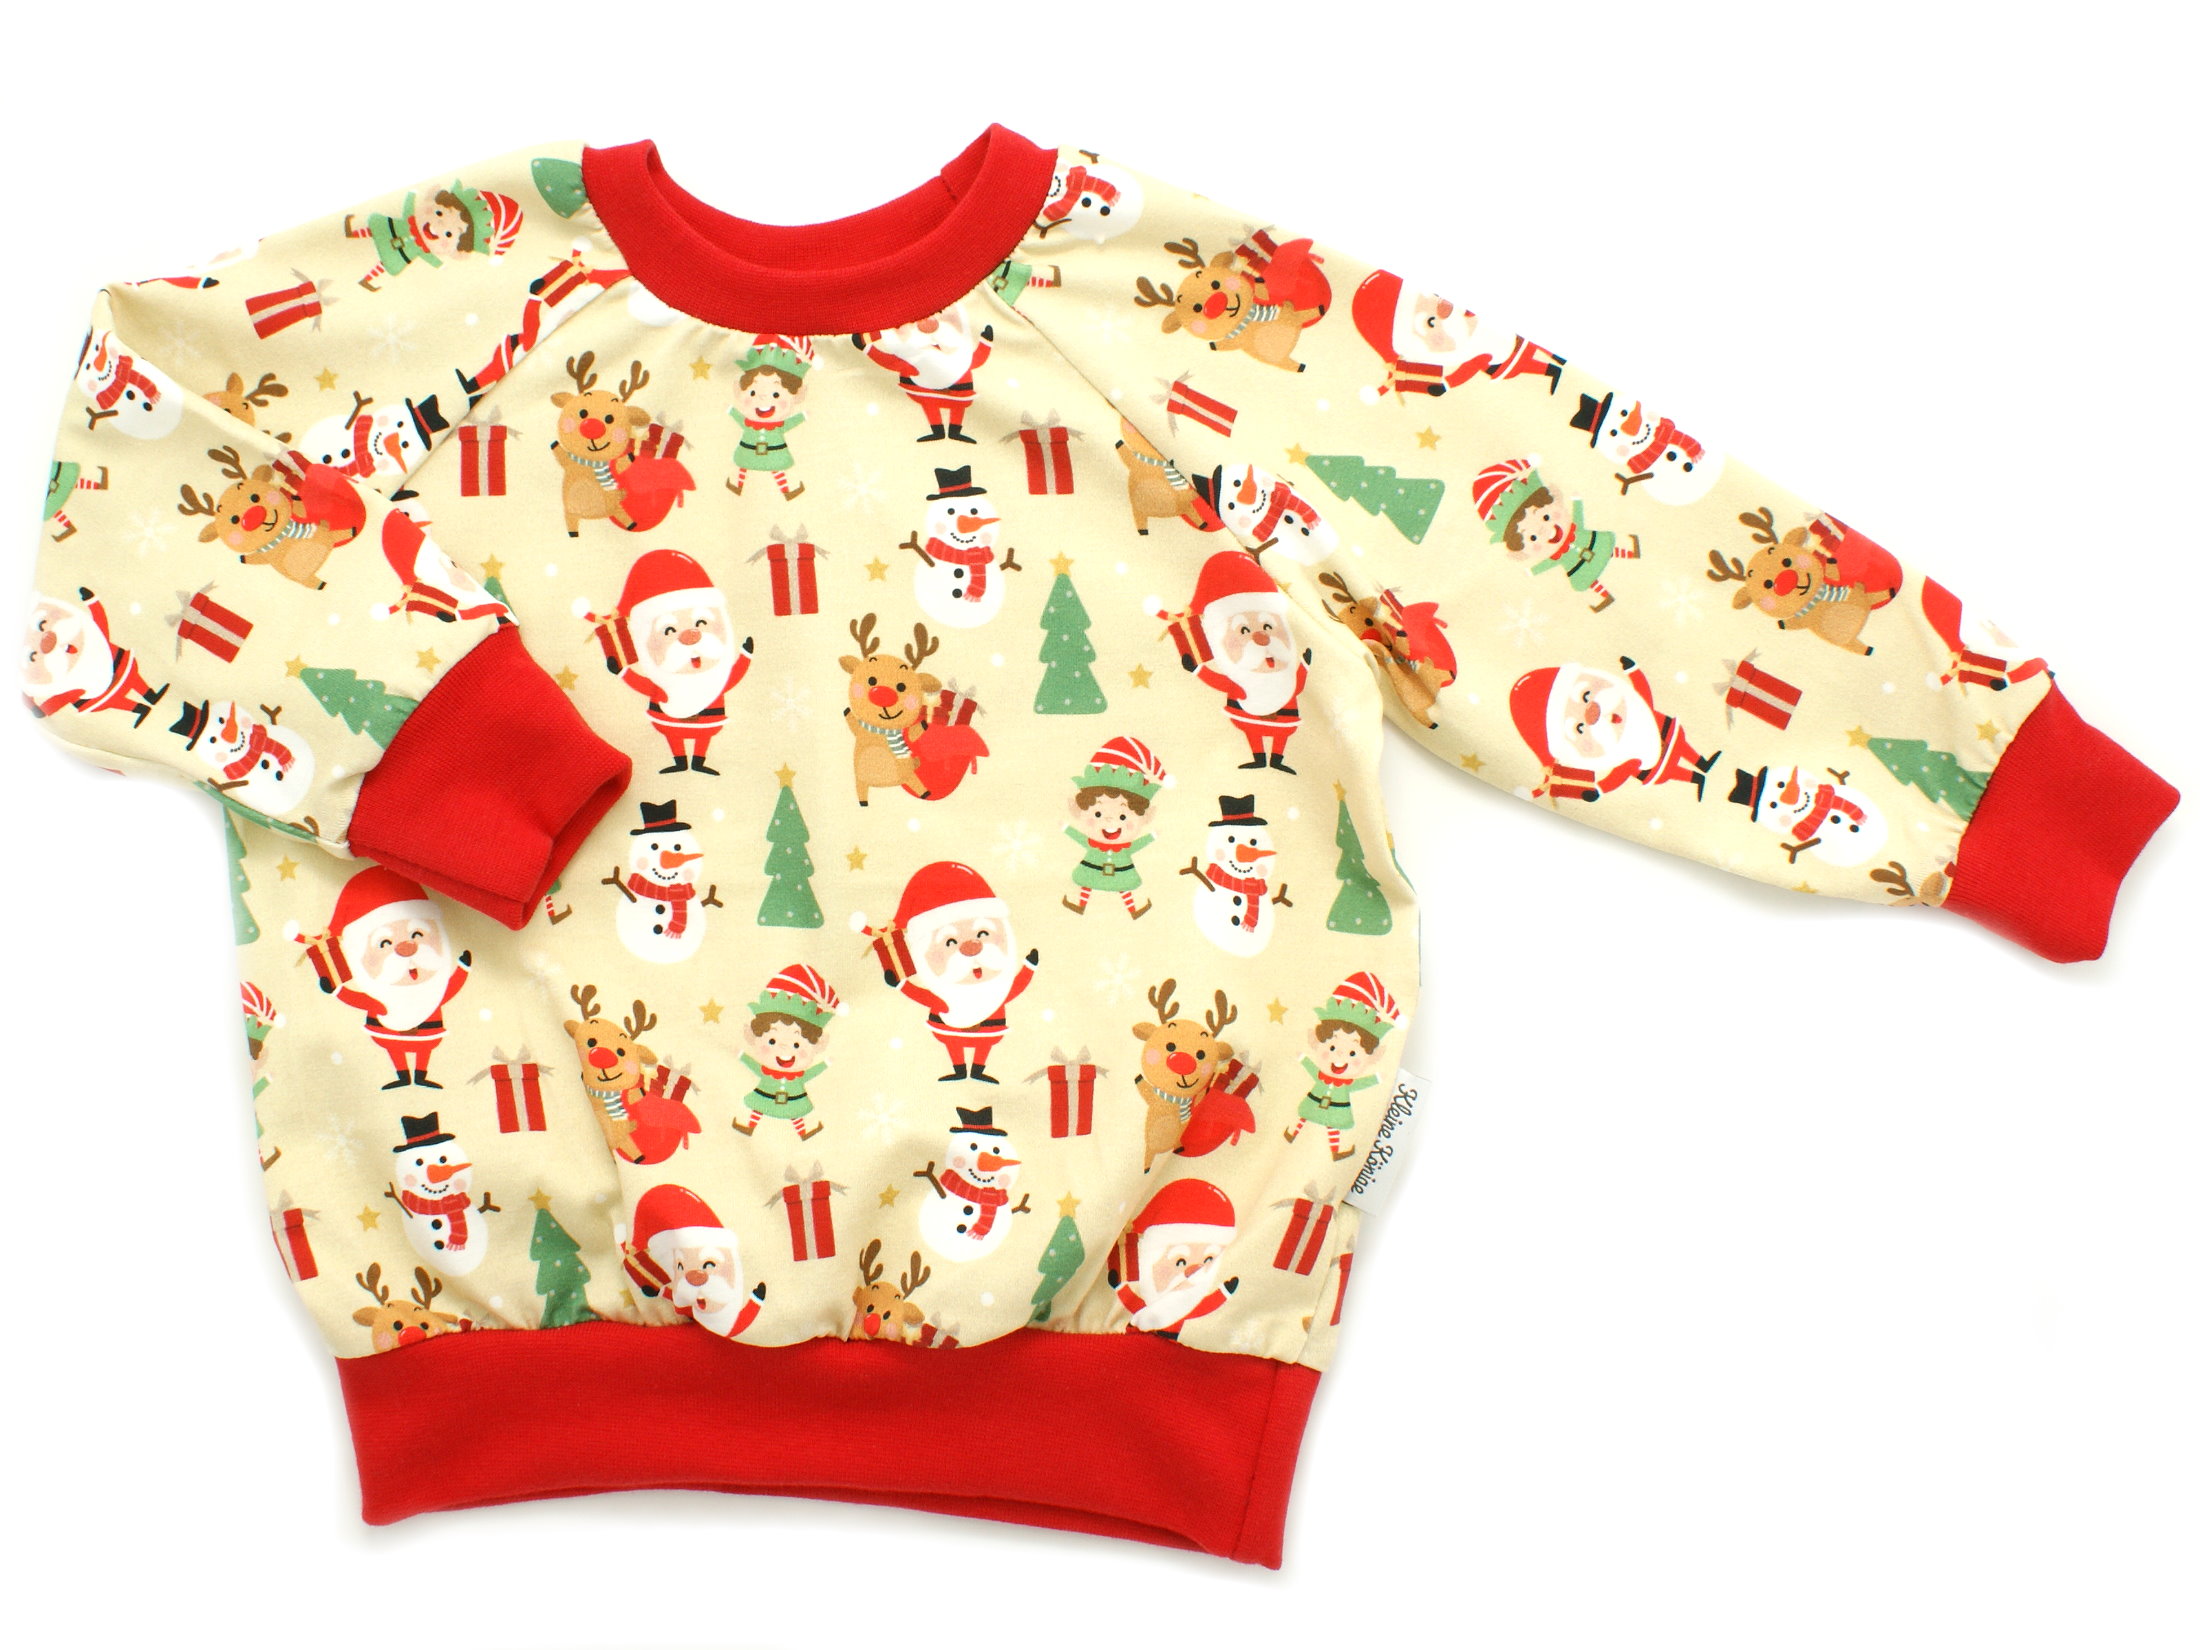 Kinder Pullover Shirt "Weihnachtsparty" rot